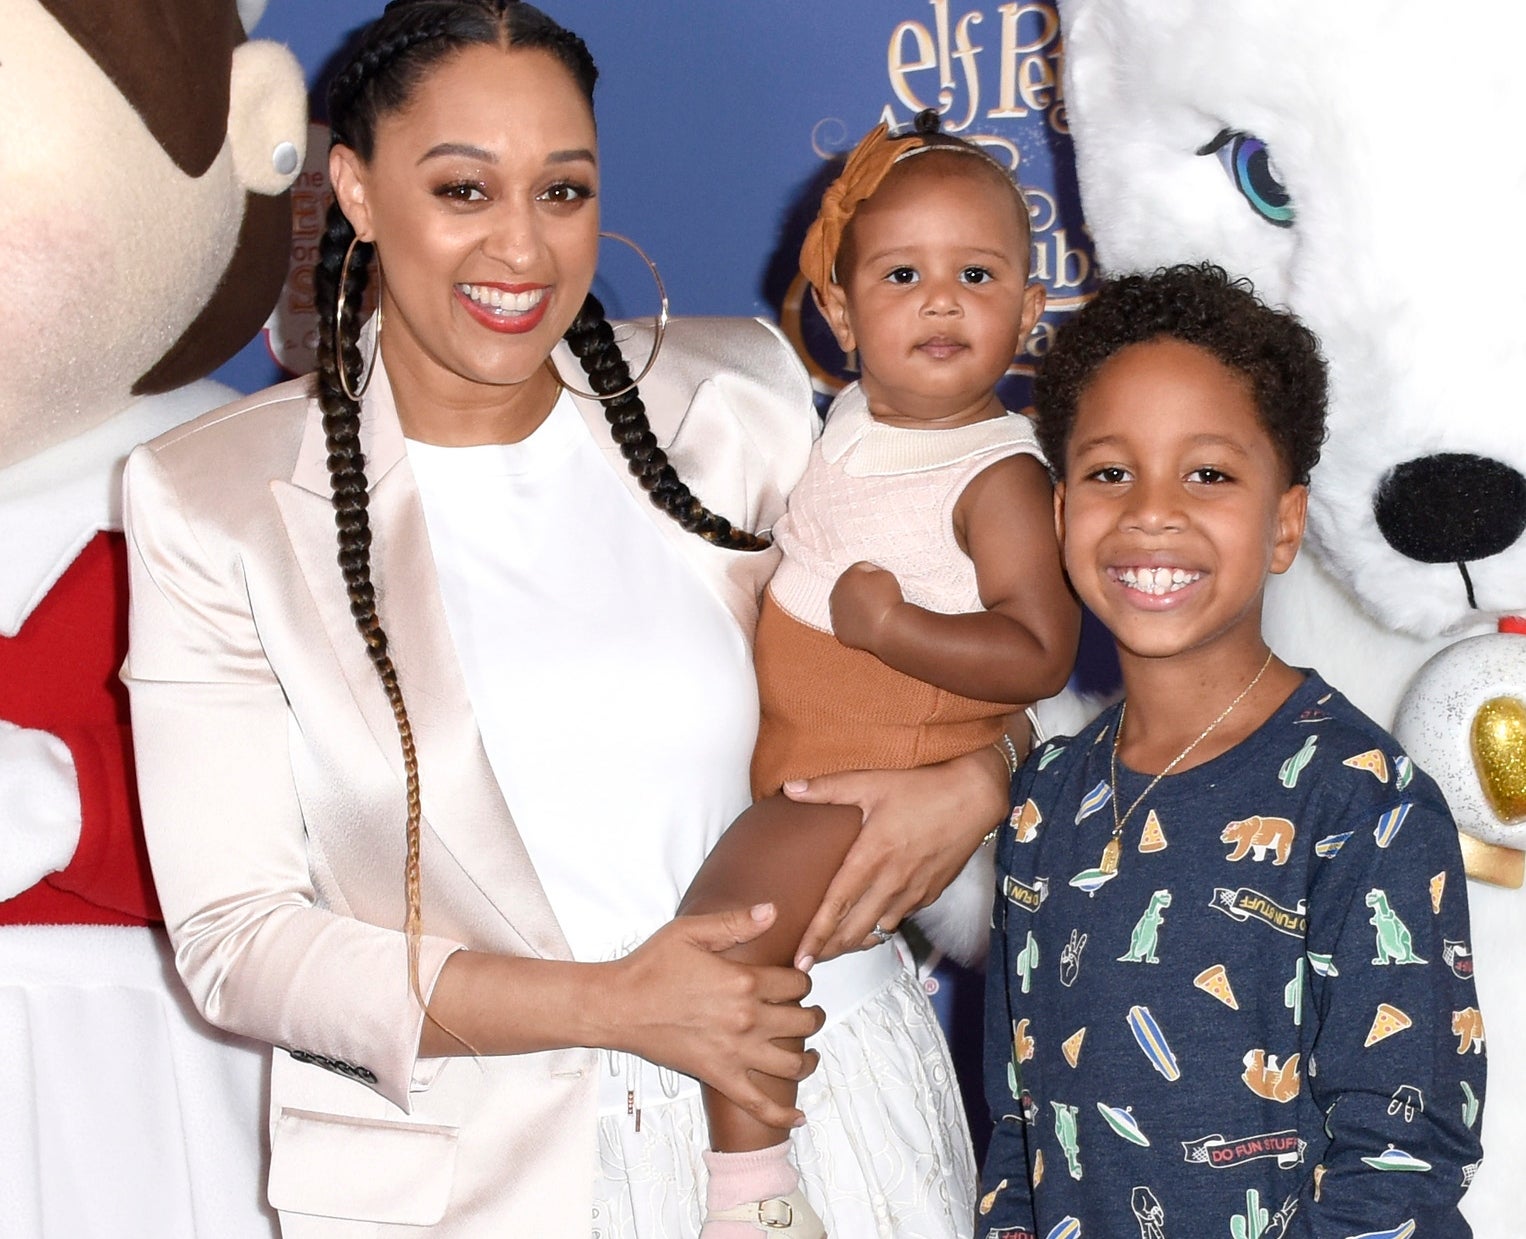 'Pregnancy Wasn't Easy For Me': Tia Mowry Shares How Struggles With Endometriosis Affected Her Journey To Motherhood